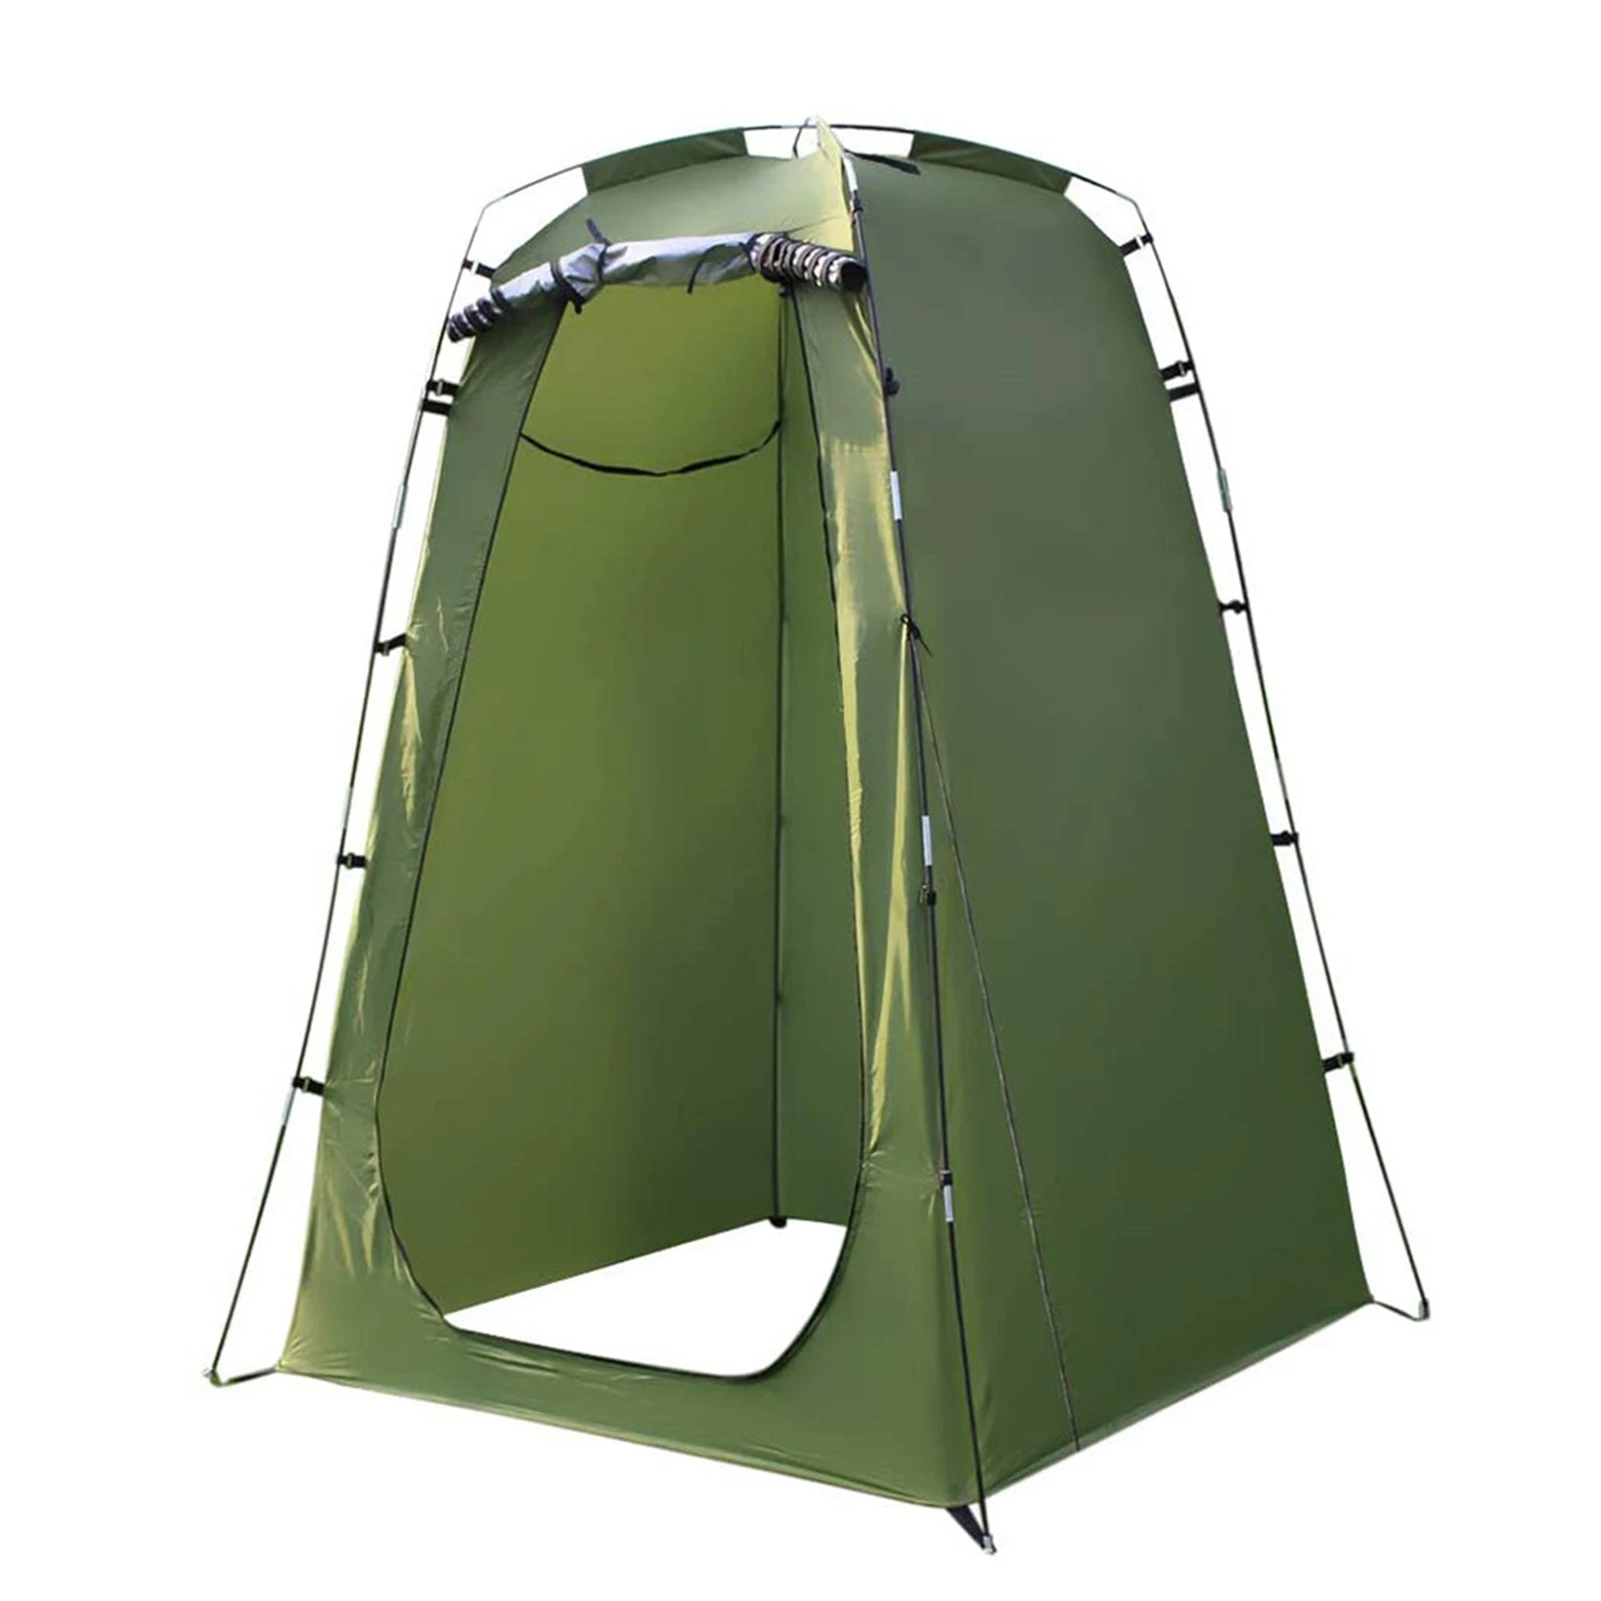 

Outdoor Shower Bath Tent Camping Privacy Toilet Tent Portable Changing Room FitsPerson Sun Protection Quickly Build